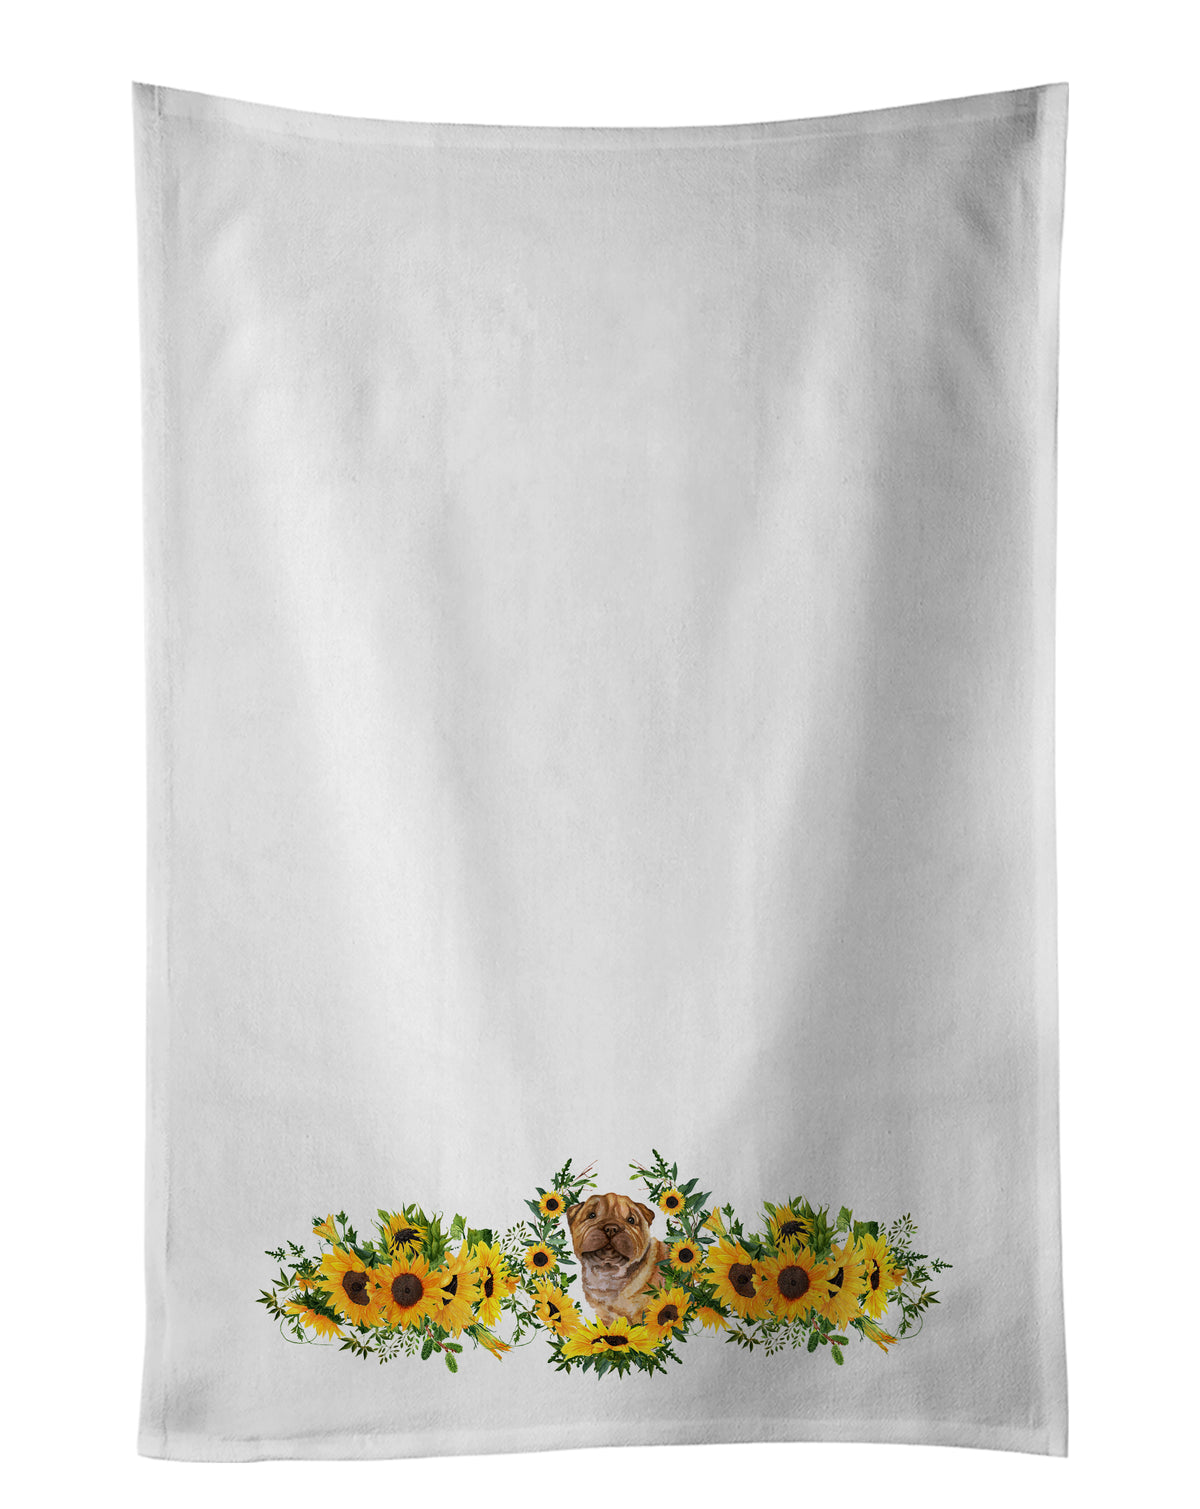 Buy this Shar Pei Puppy in Sunflowers White Kitchen Towel Set of 2